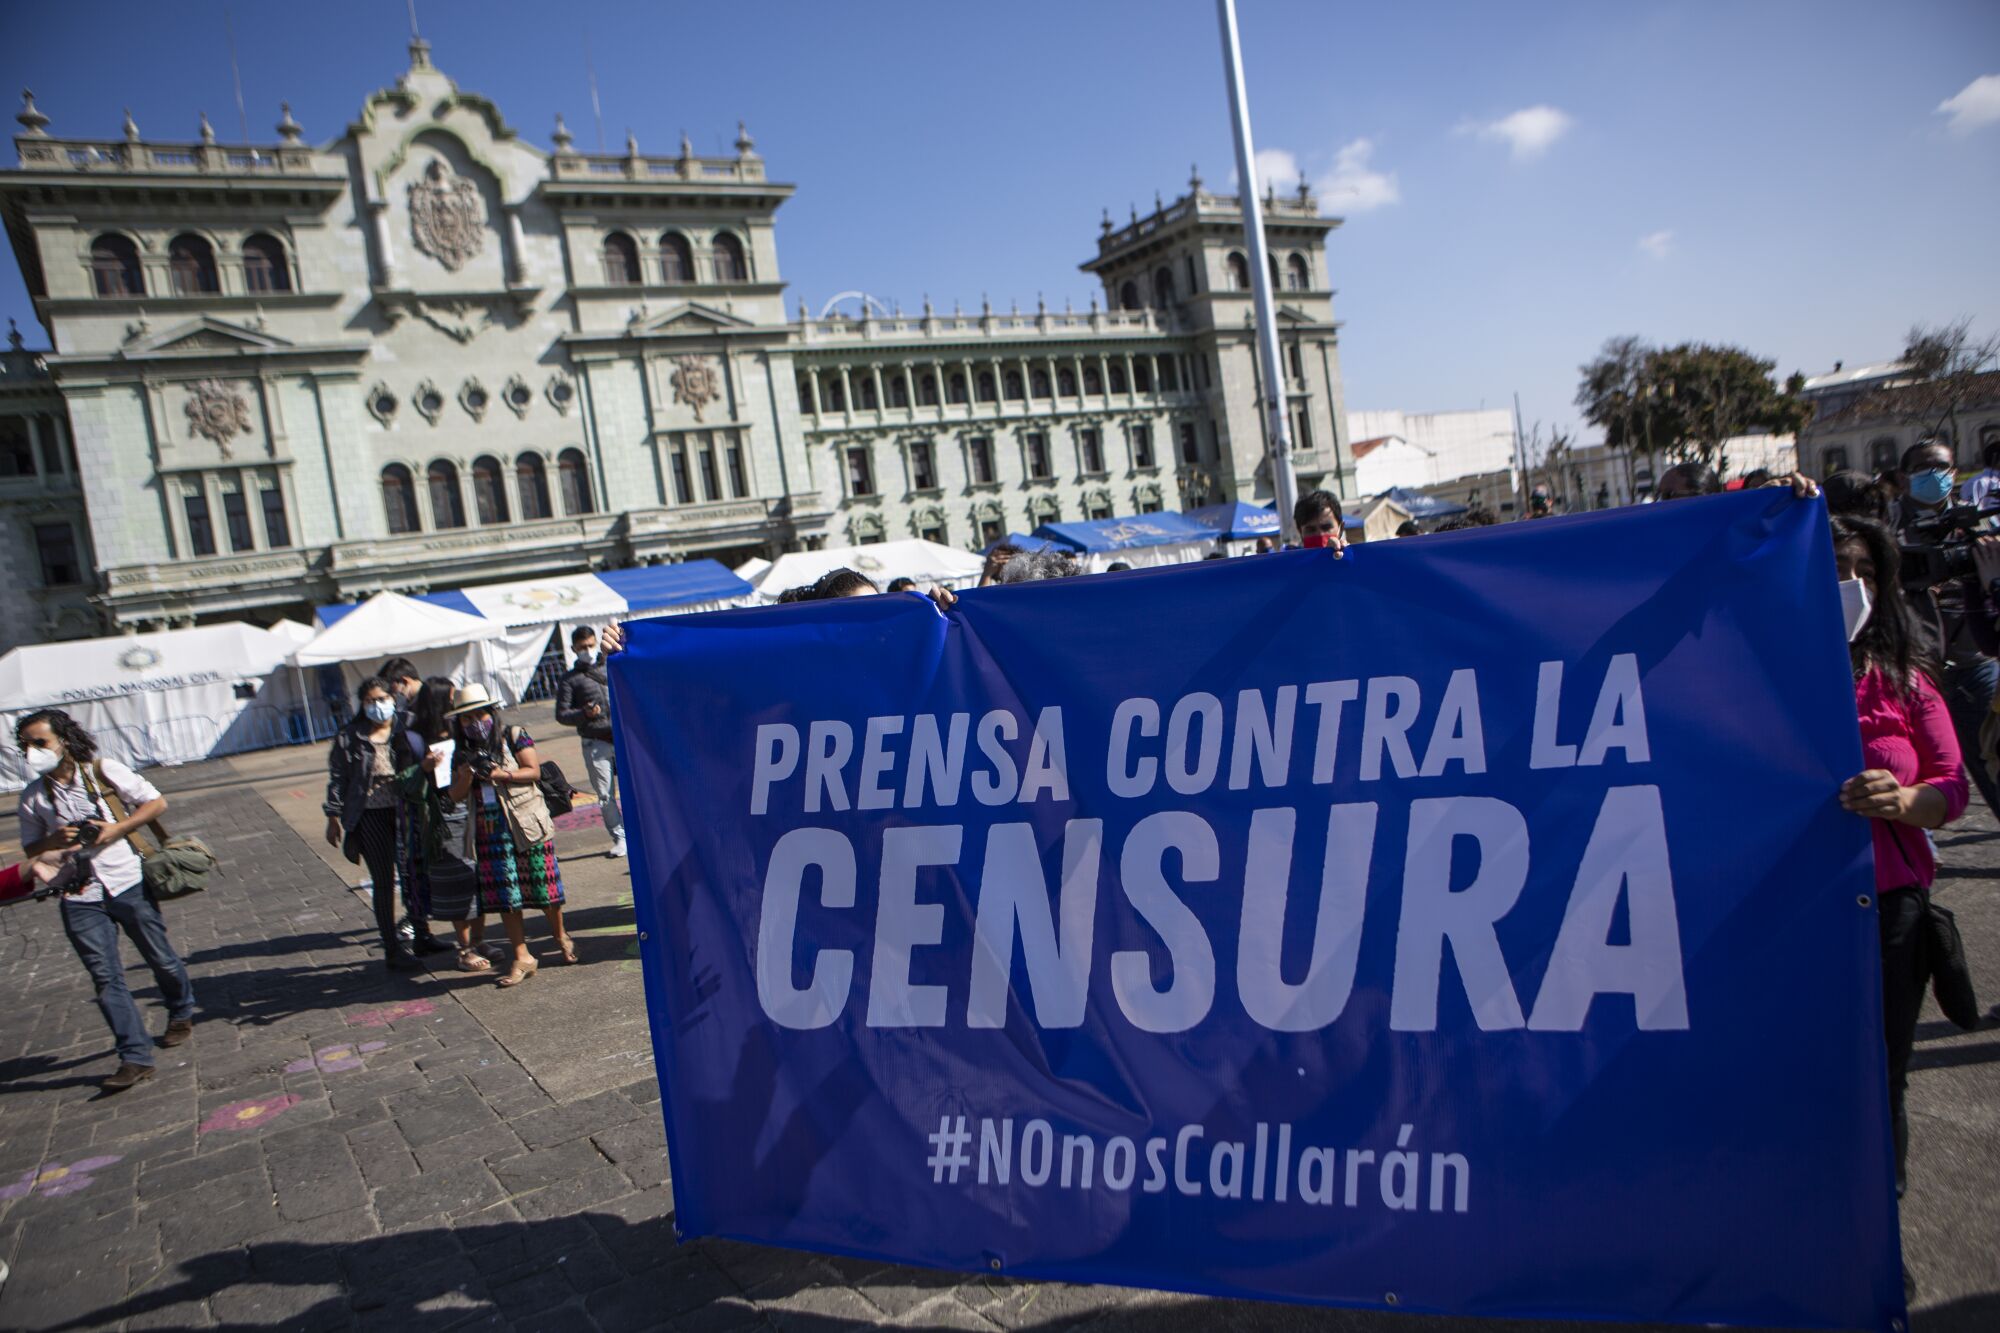 Demonstrators stage a protest in support of journalist Ruben Zamora and press freedoms